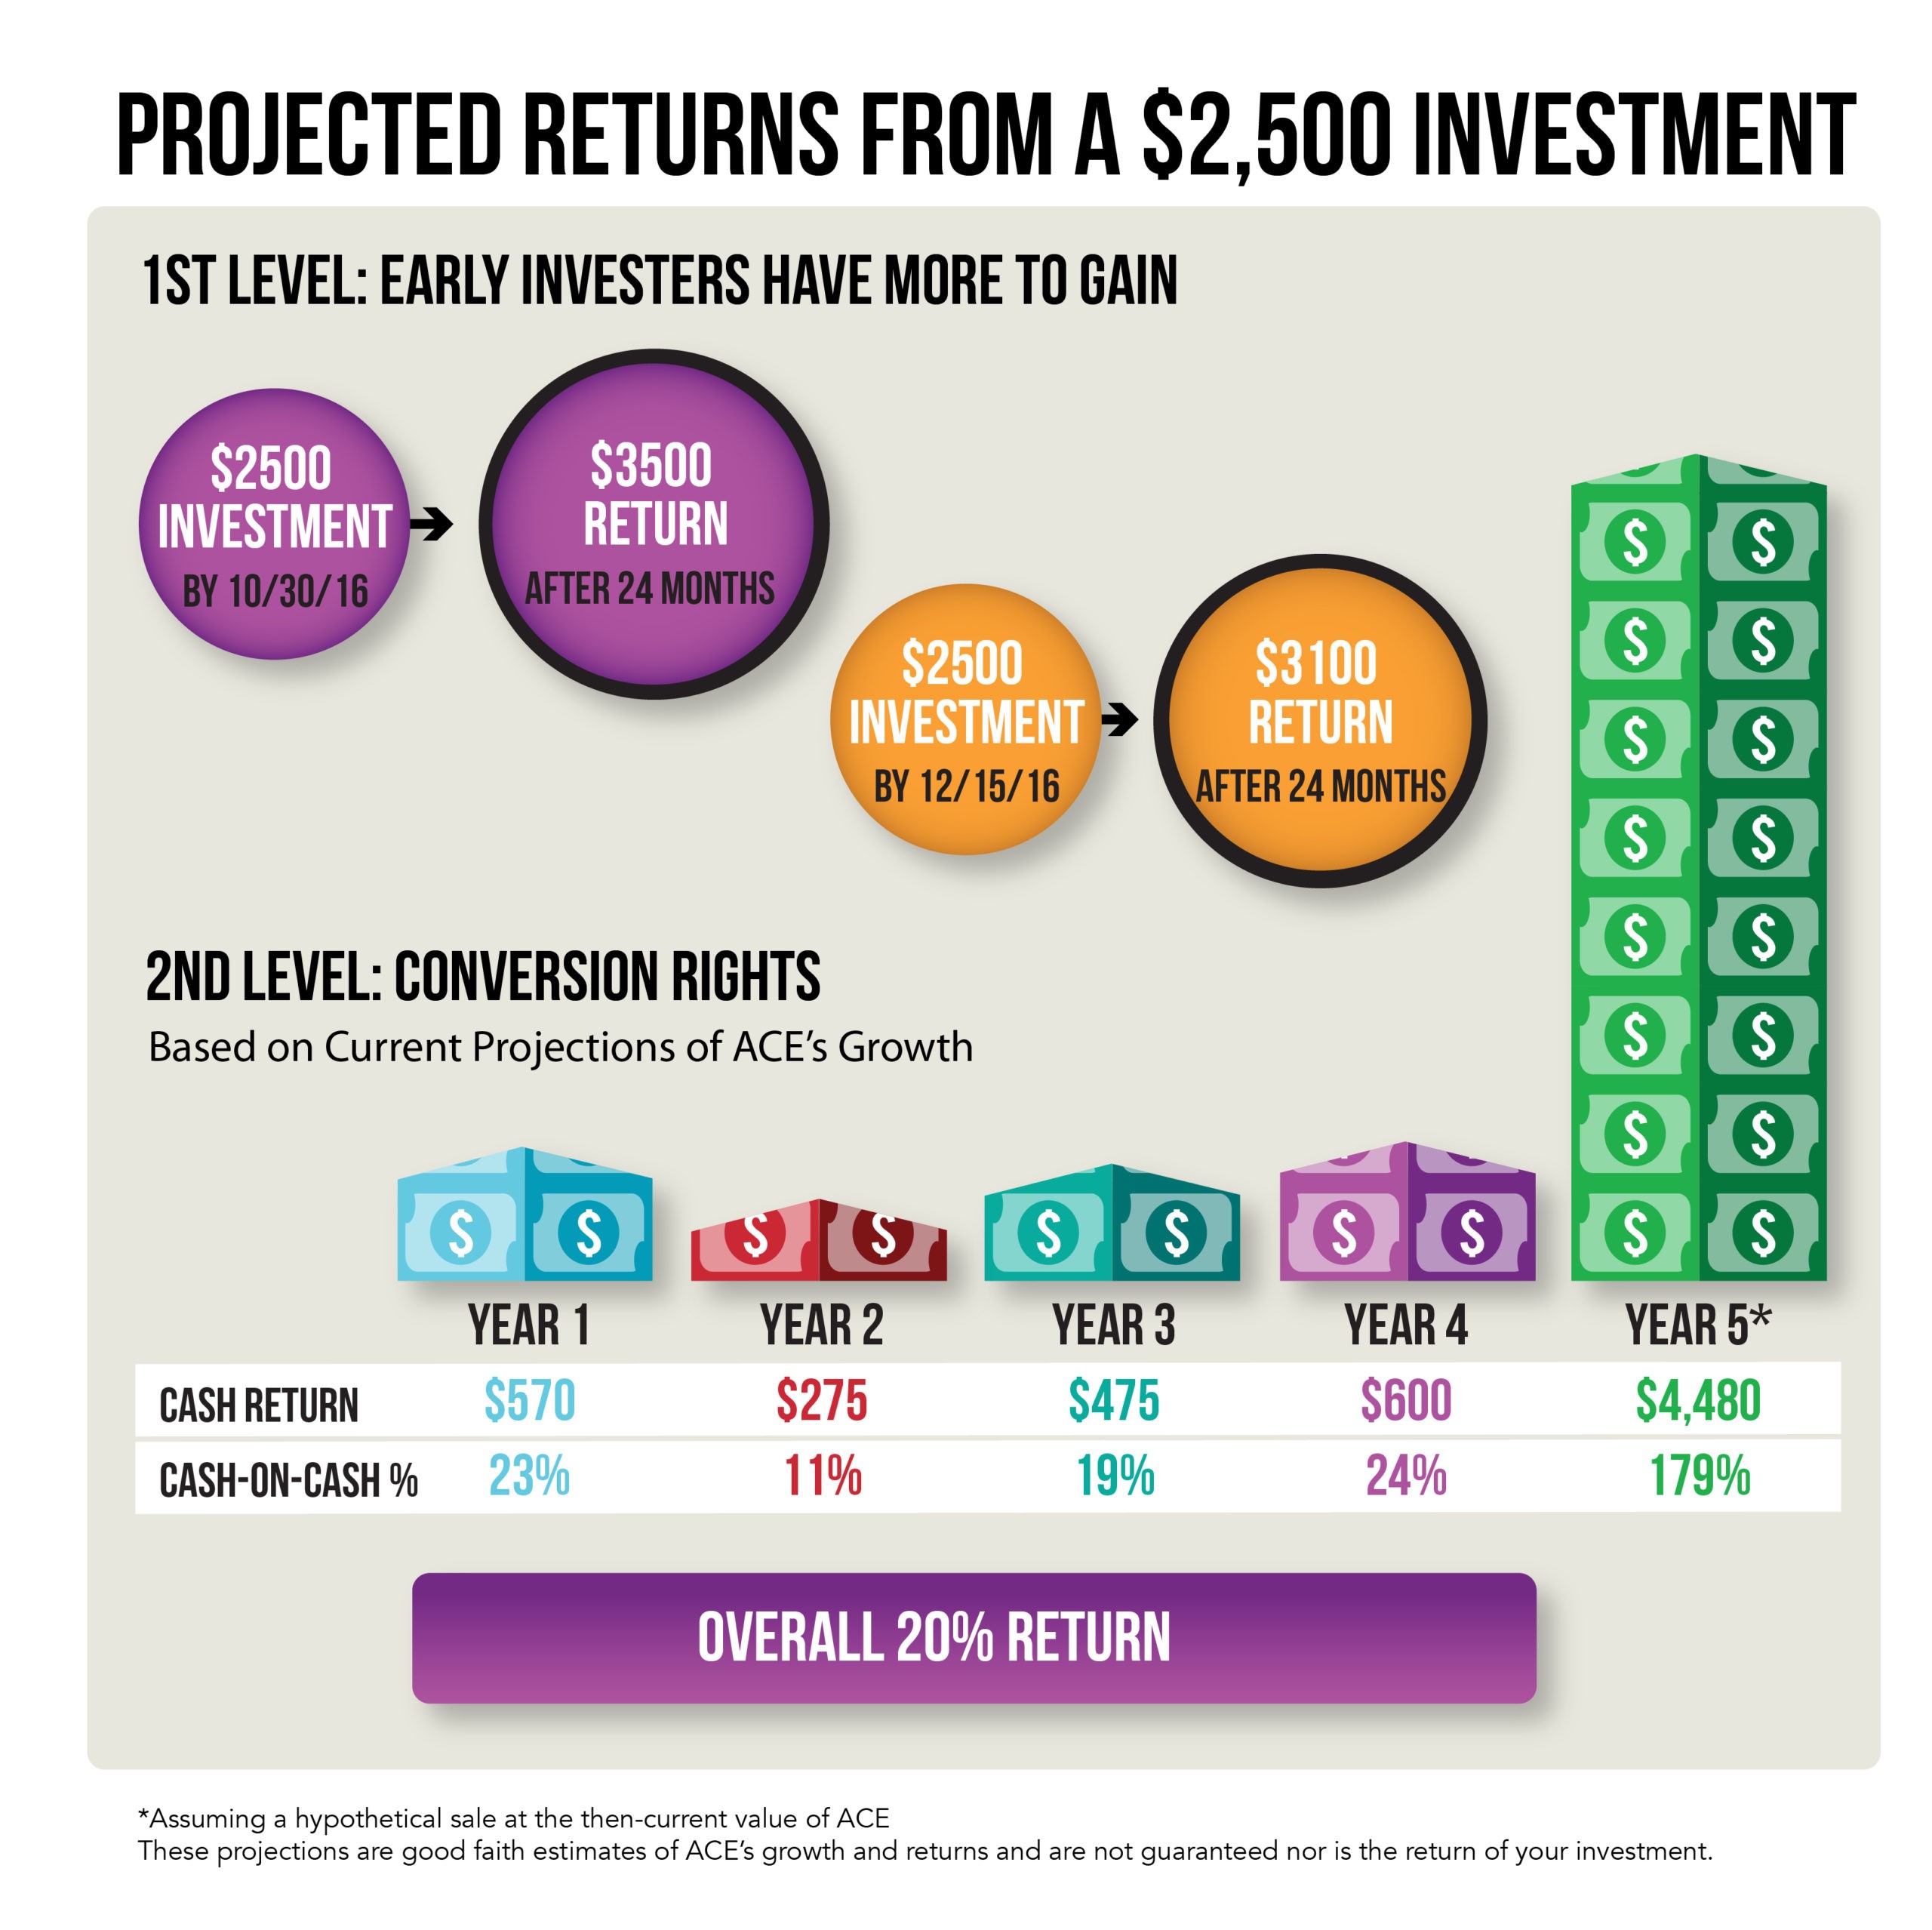 Projected returns